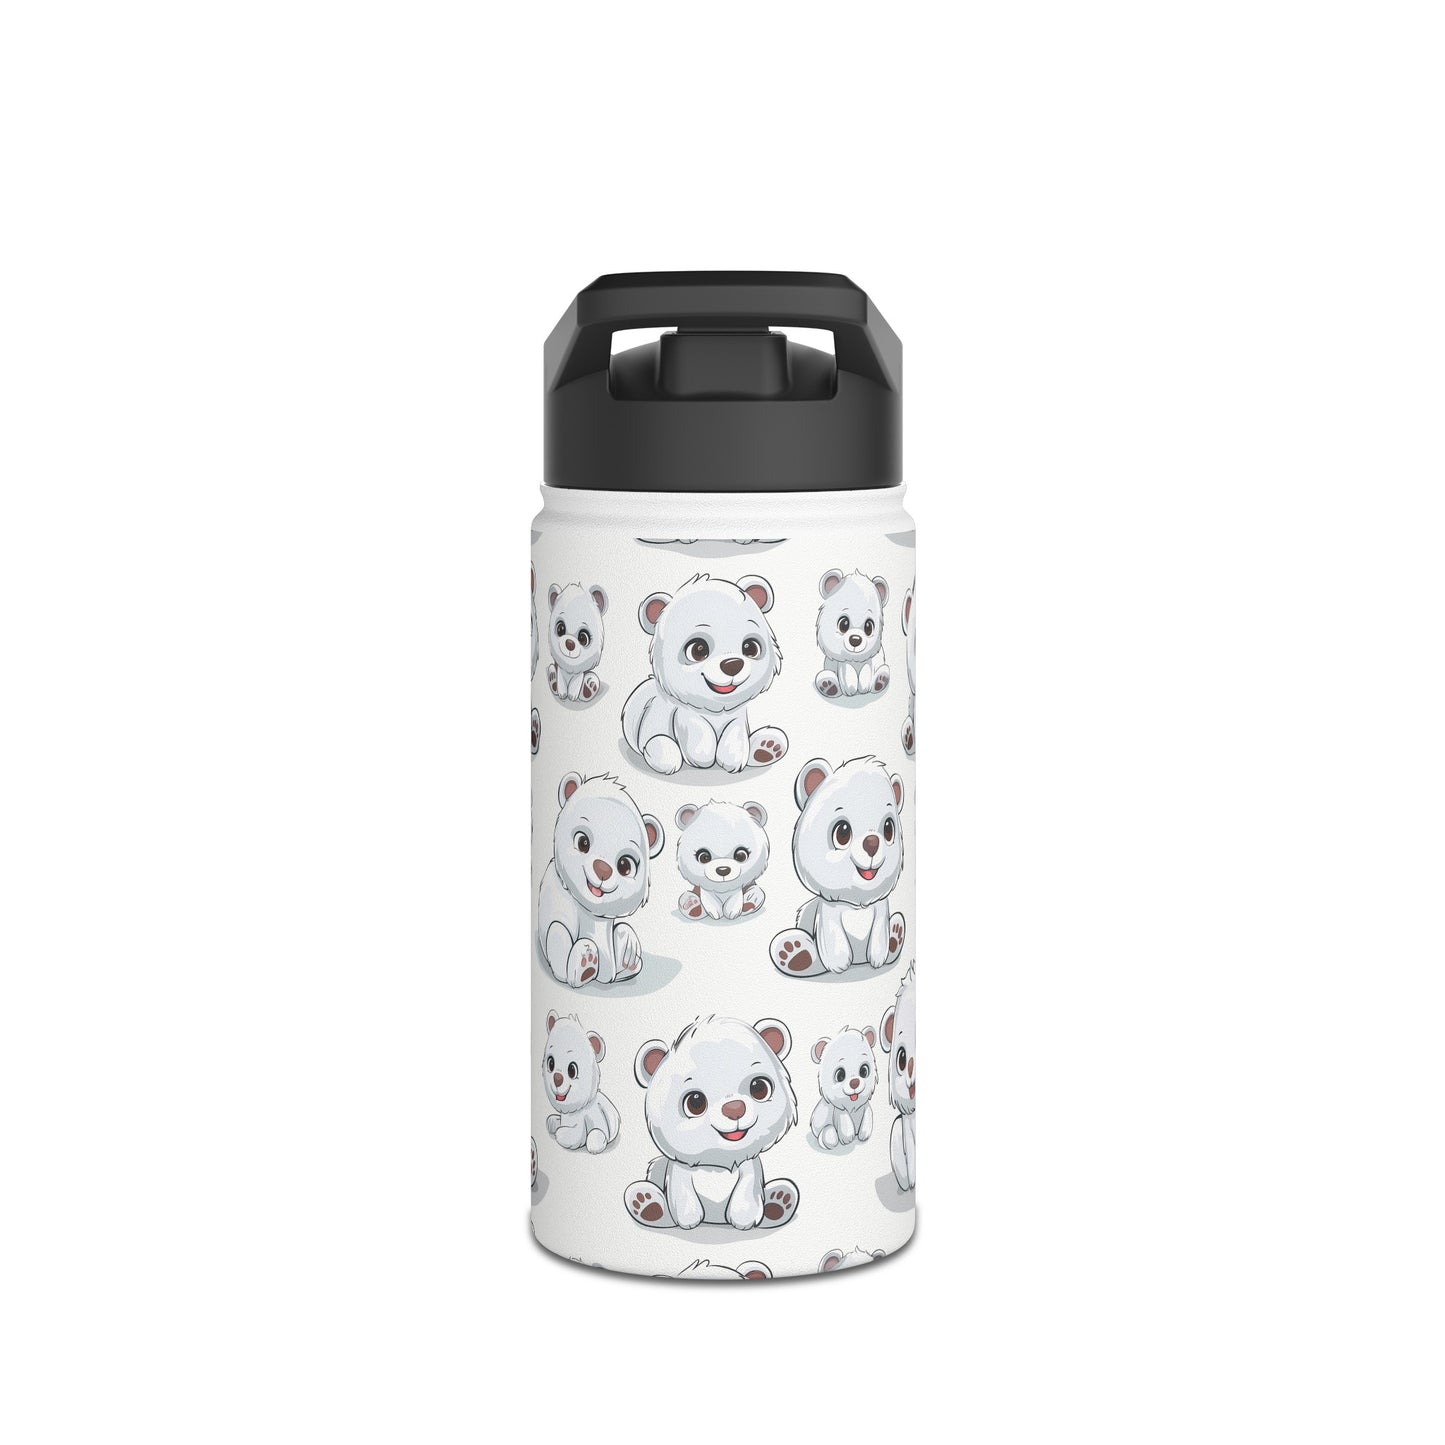 Insulated Water Bottle, 12oz, Cute Polar Bear Cubs - Double Walled Stainless Steel Thermos, Keeps Drinks Hot or Cold